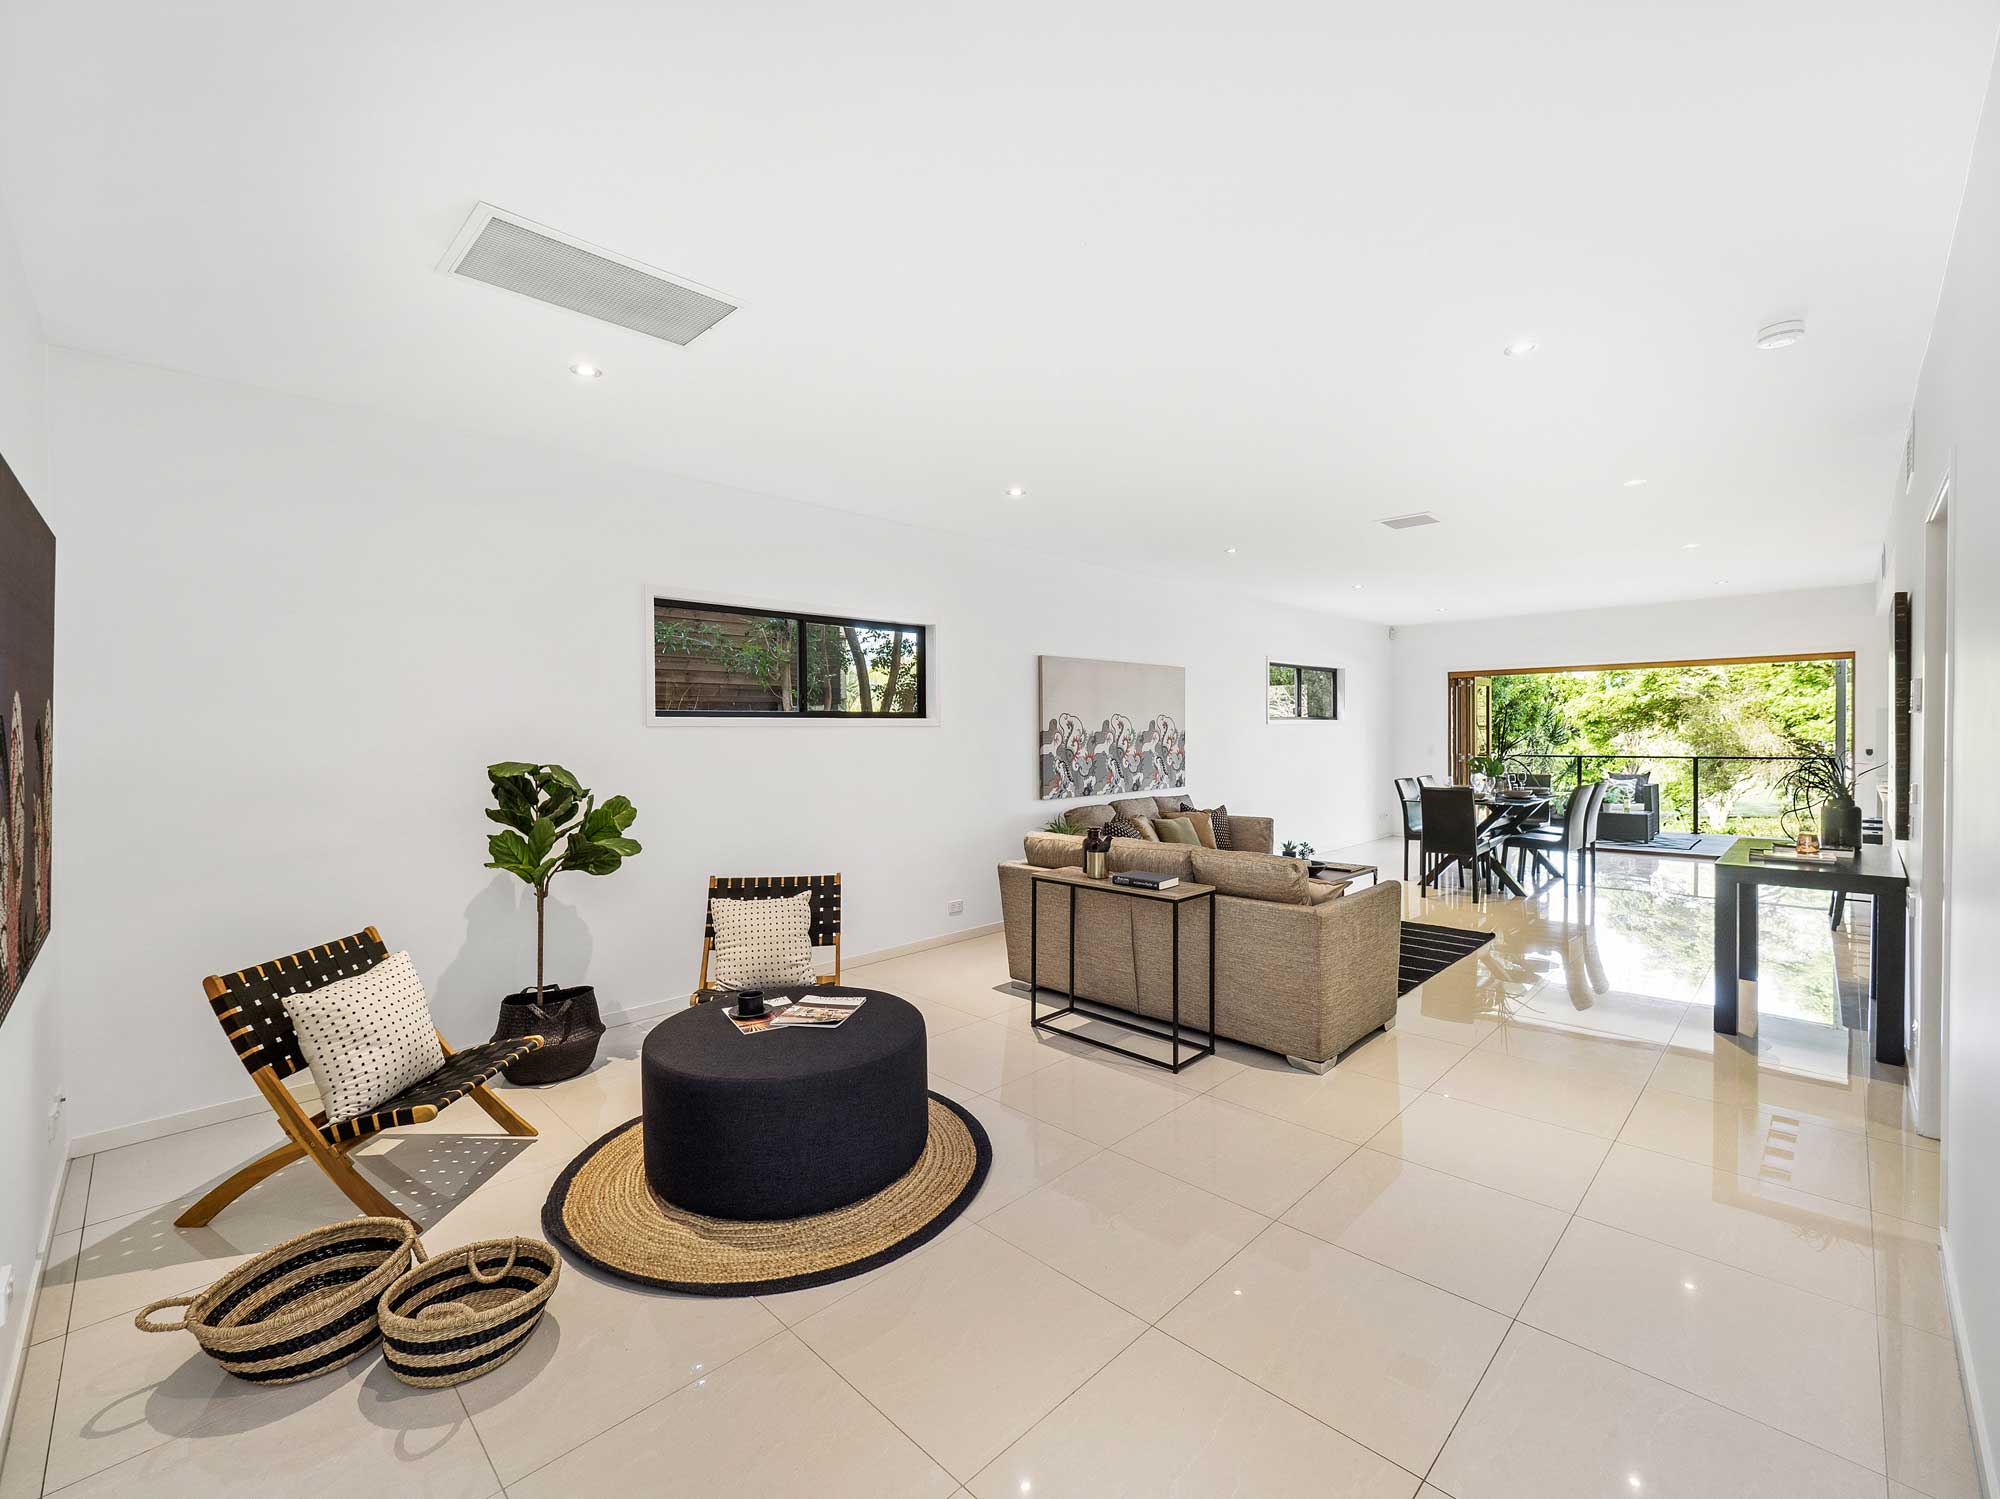 Real estate photography for a new home listing at Wavell Heights, Brisbane north side